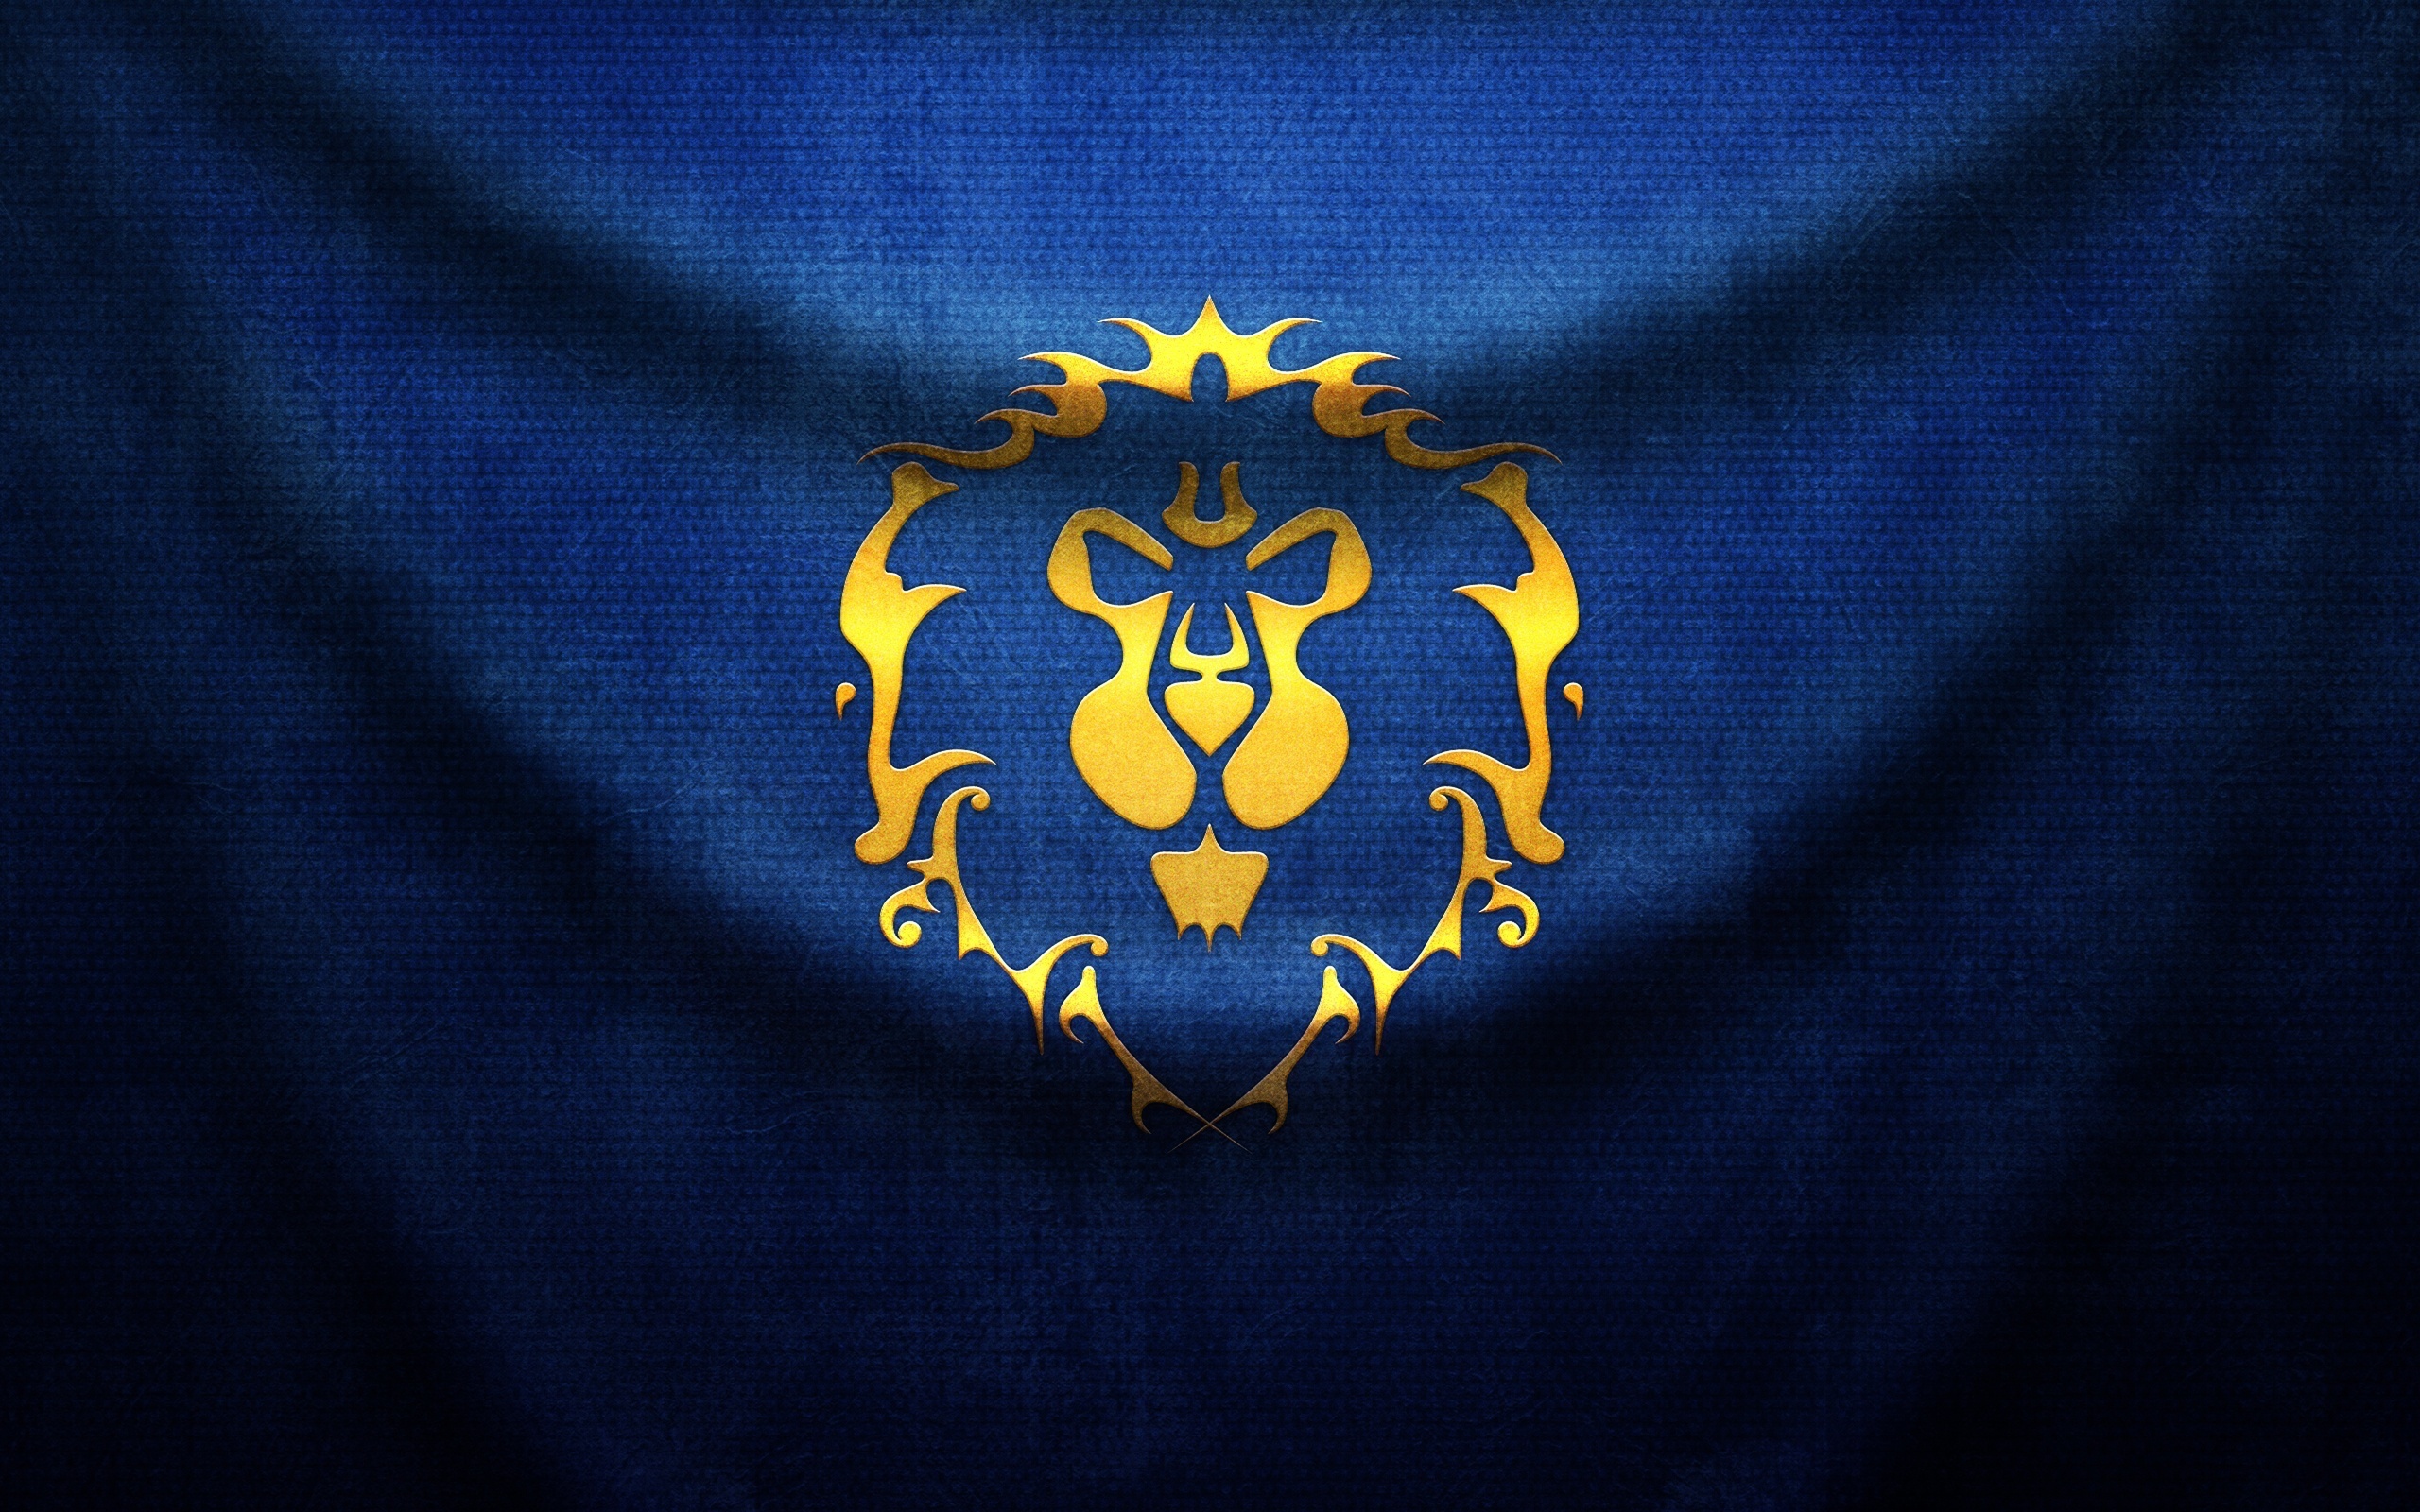 world of warcraft wow, games, background, coats of arms, blue